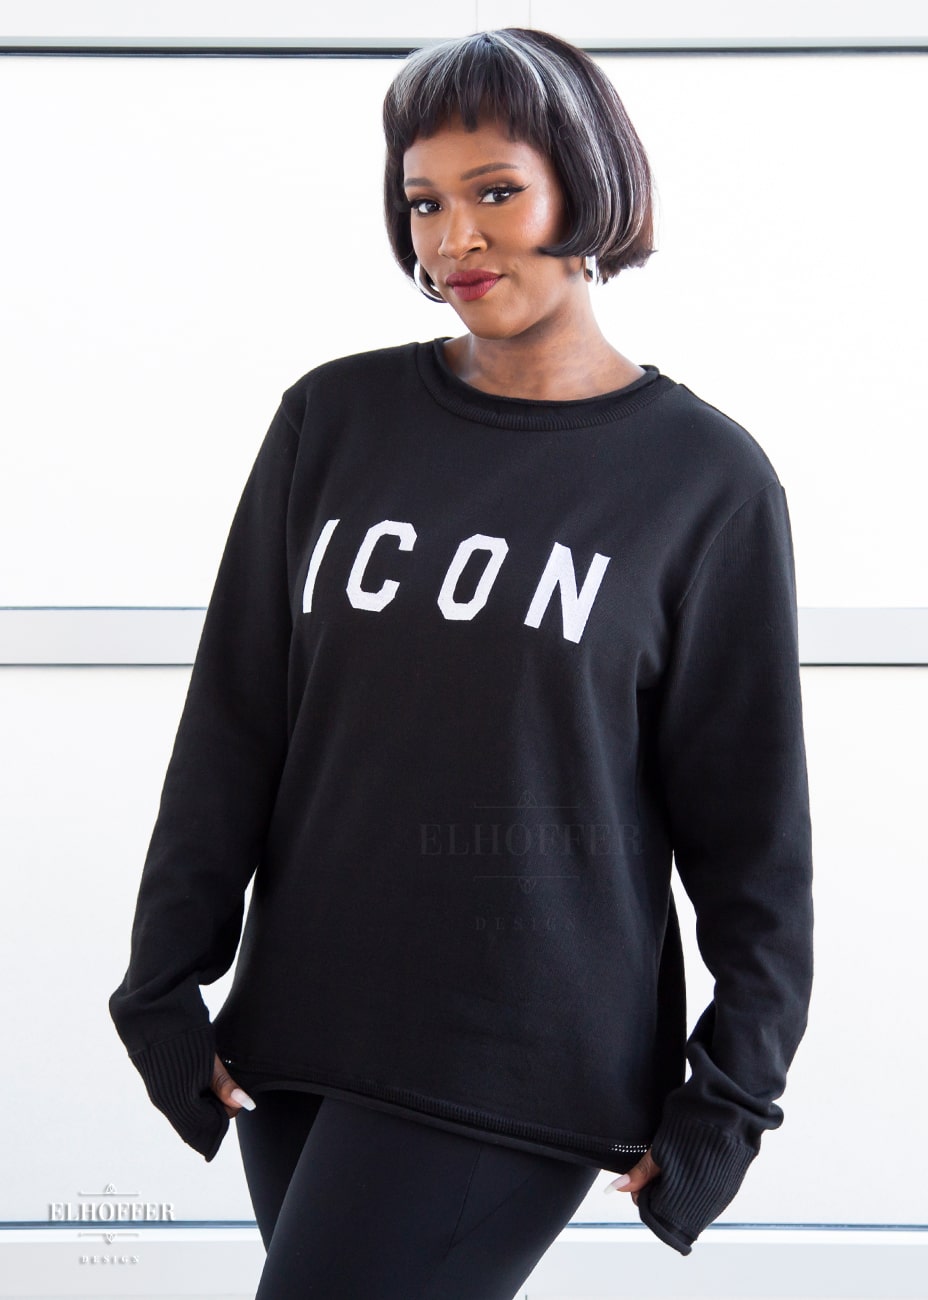 Lynsi, a medium dark skinned M model with short black and white hair, is wearing an XL sample of black unisex sweater with white bold embroidered letters that spell ICON and has long sleeves with thumbholes. The sweater also has a rolled hem on both the neckline and around the cuffs. The XL sample makes the sweater look like a relaxed fit, she would normally wear a M, or a S if she wanted it more fitted.